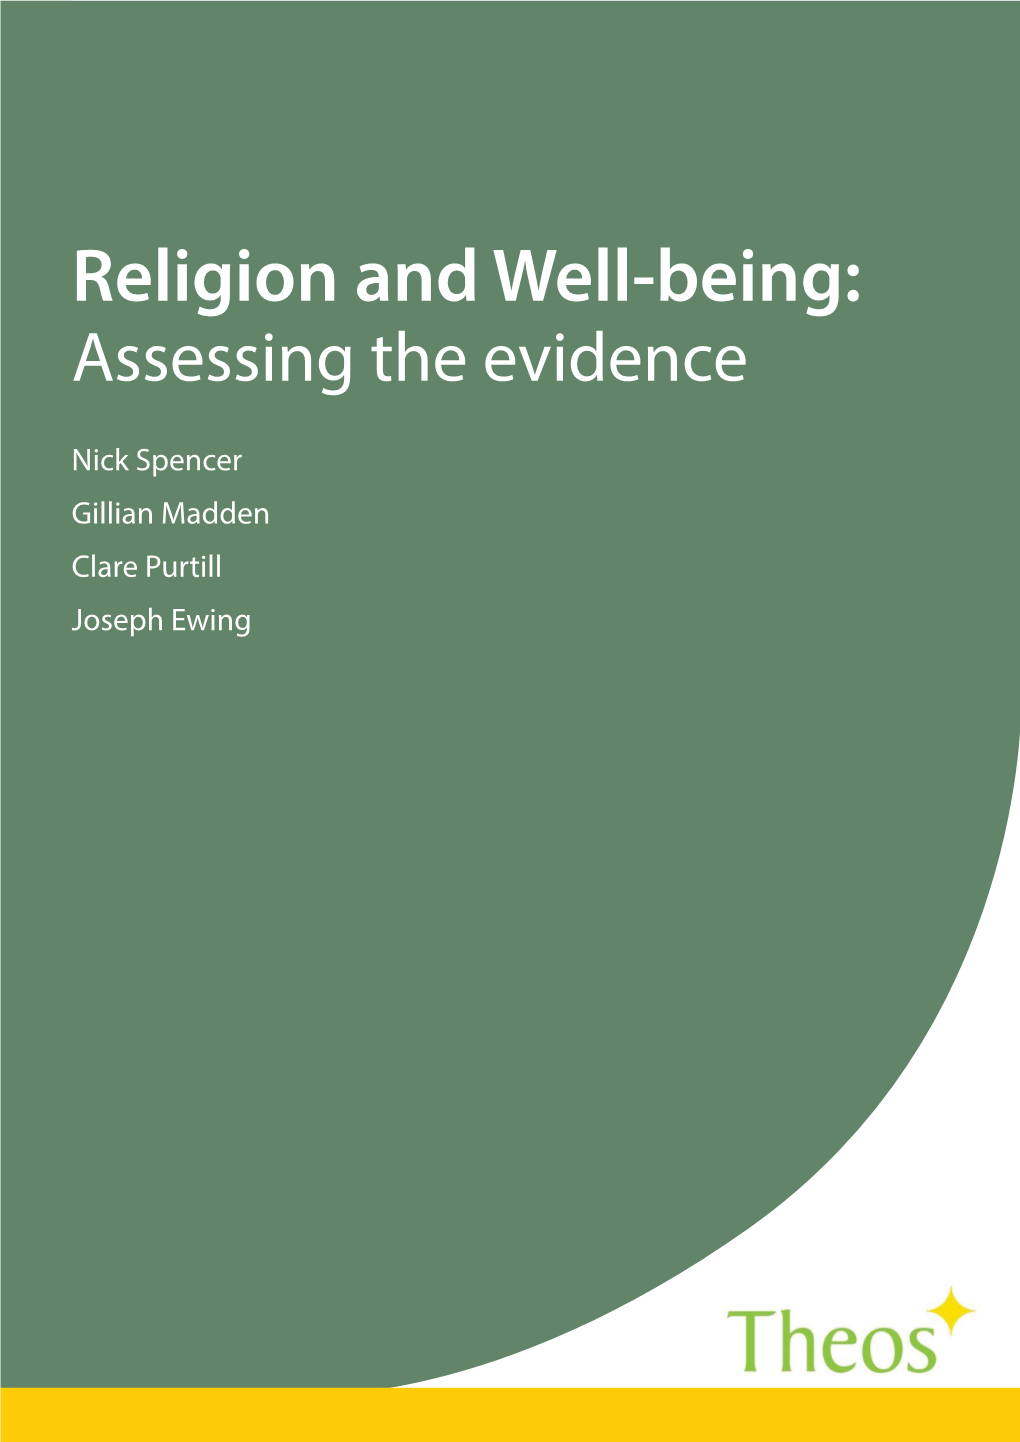 Religion and Well-Being: Assessing the Evidence